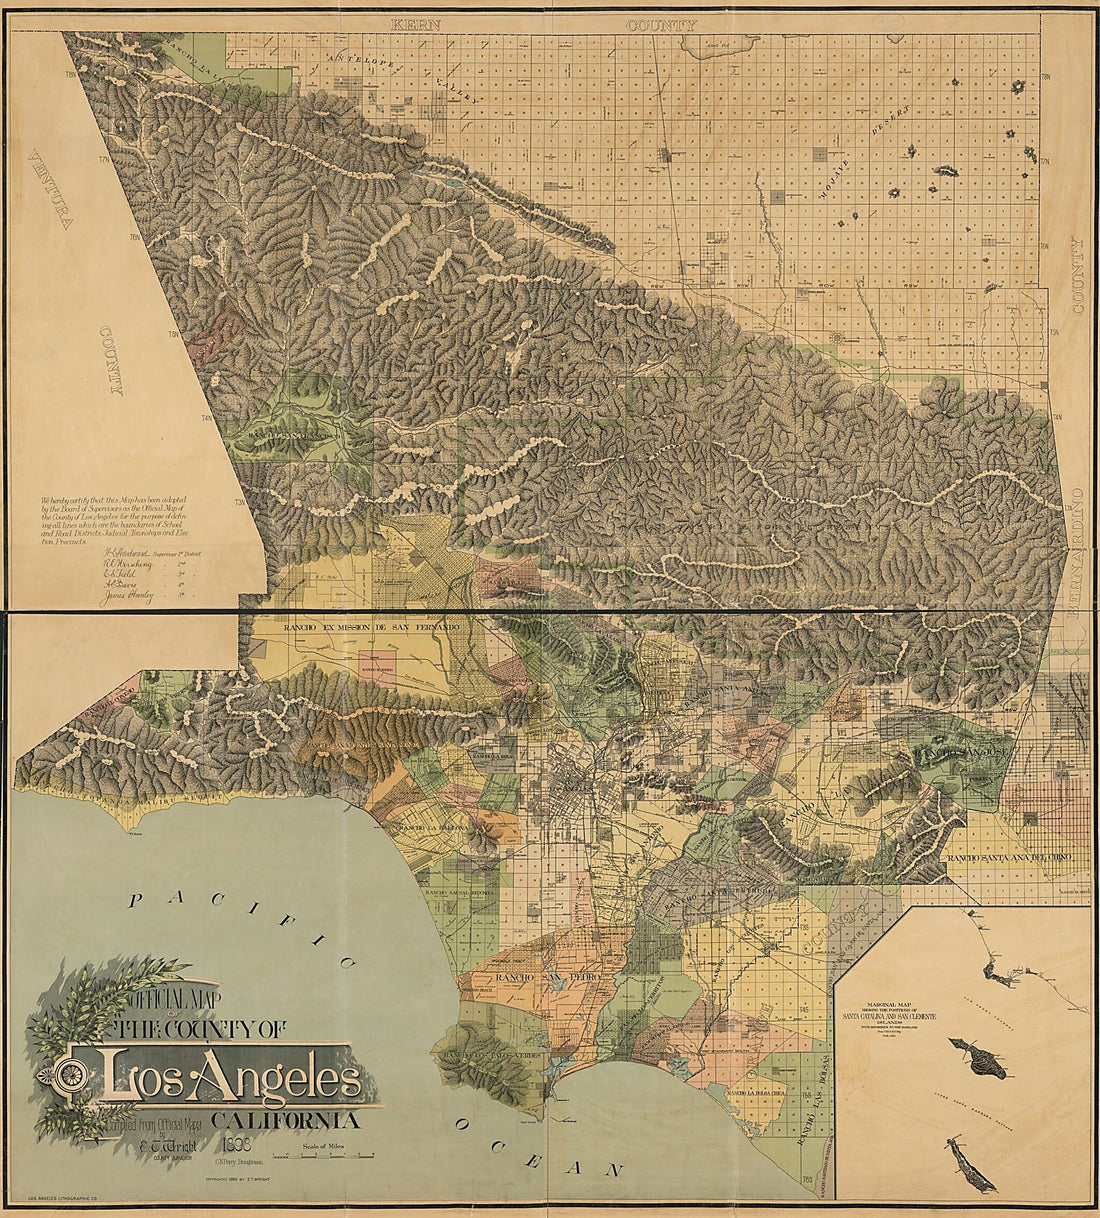 This old map of Official Map of the County of Los Angeles, California : Compiled from the Official Maps from 1898 was created by  Los Angeles Lithographic Co, C. N. Perry, E. T. (Edward T.) Wright in 1898